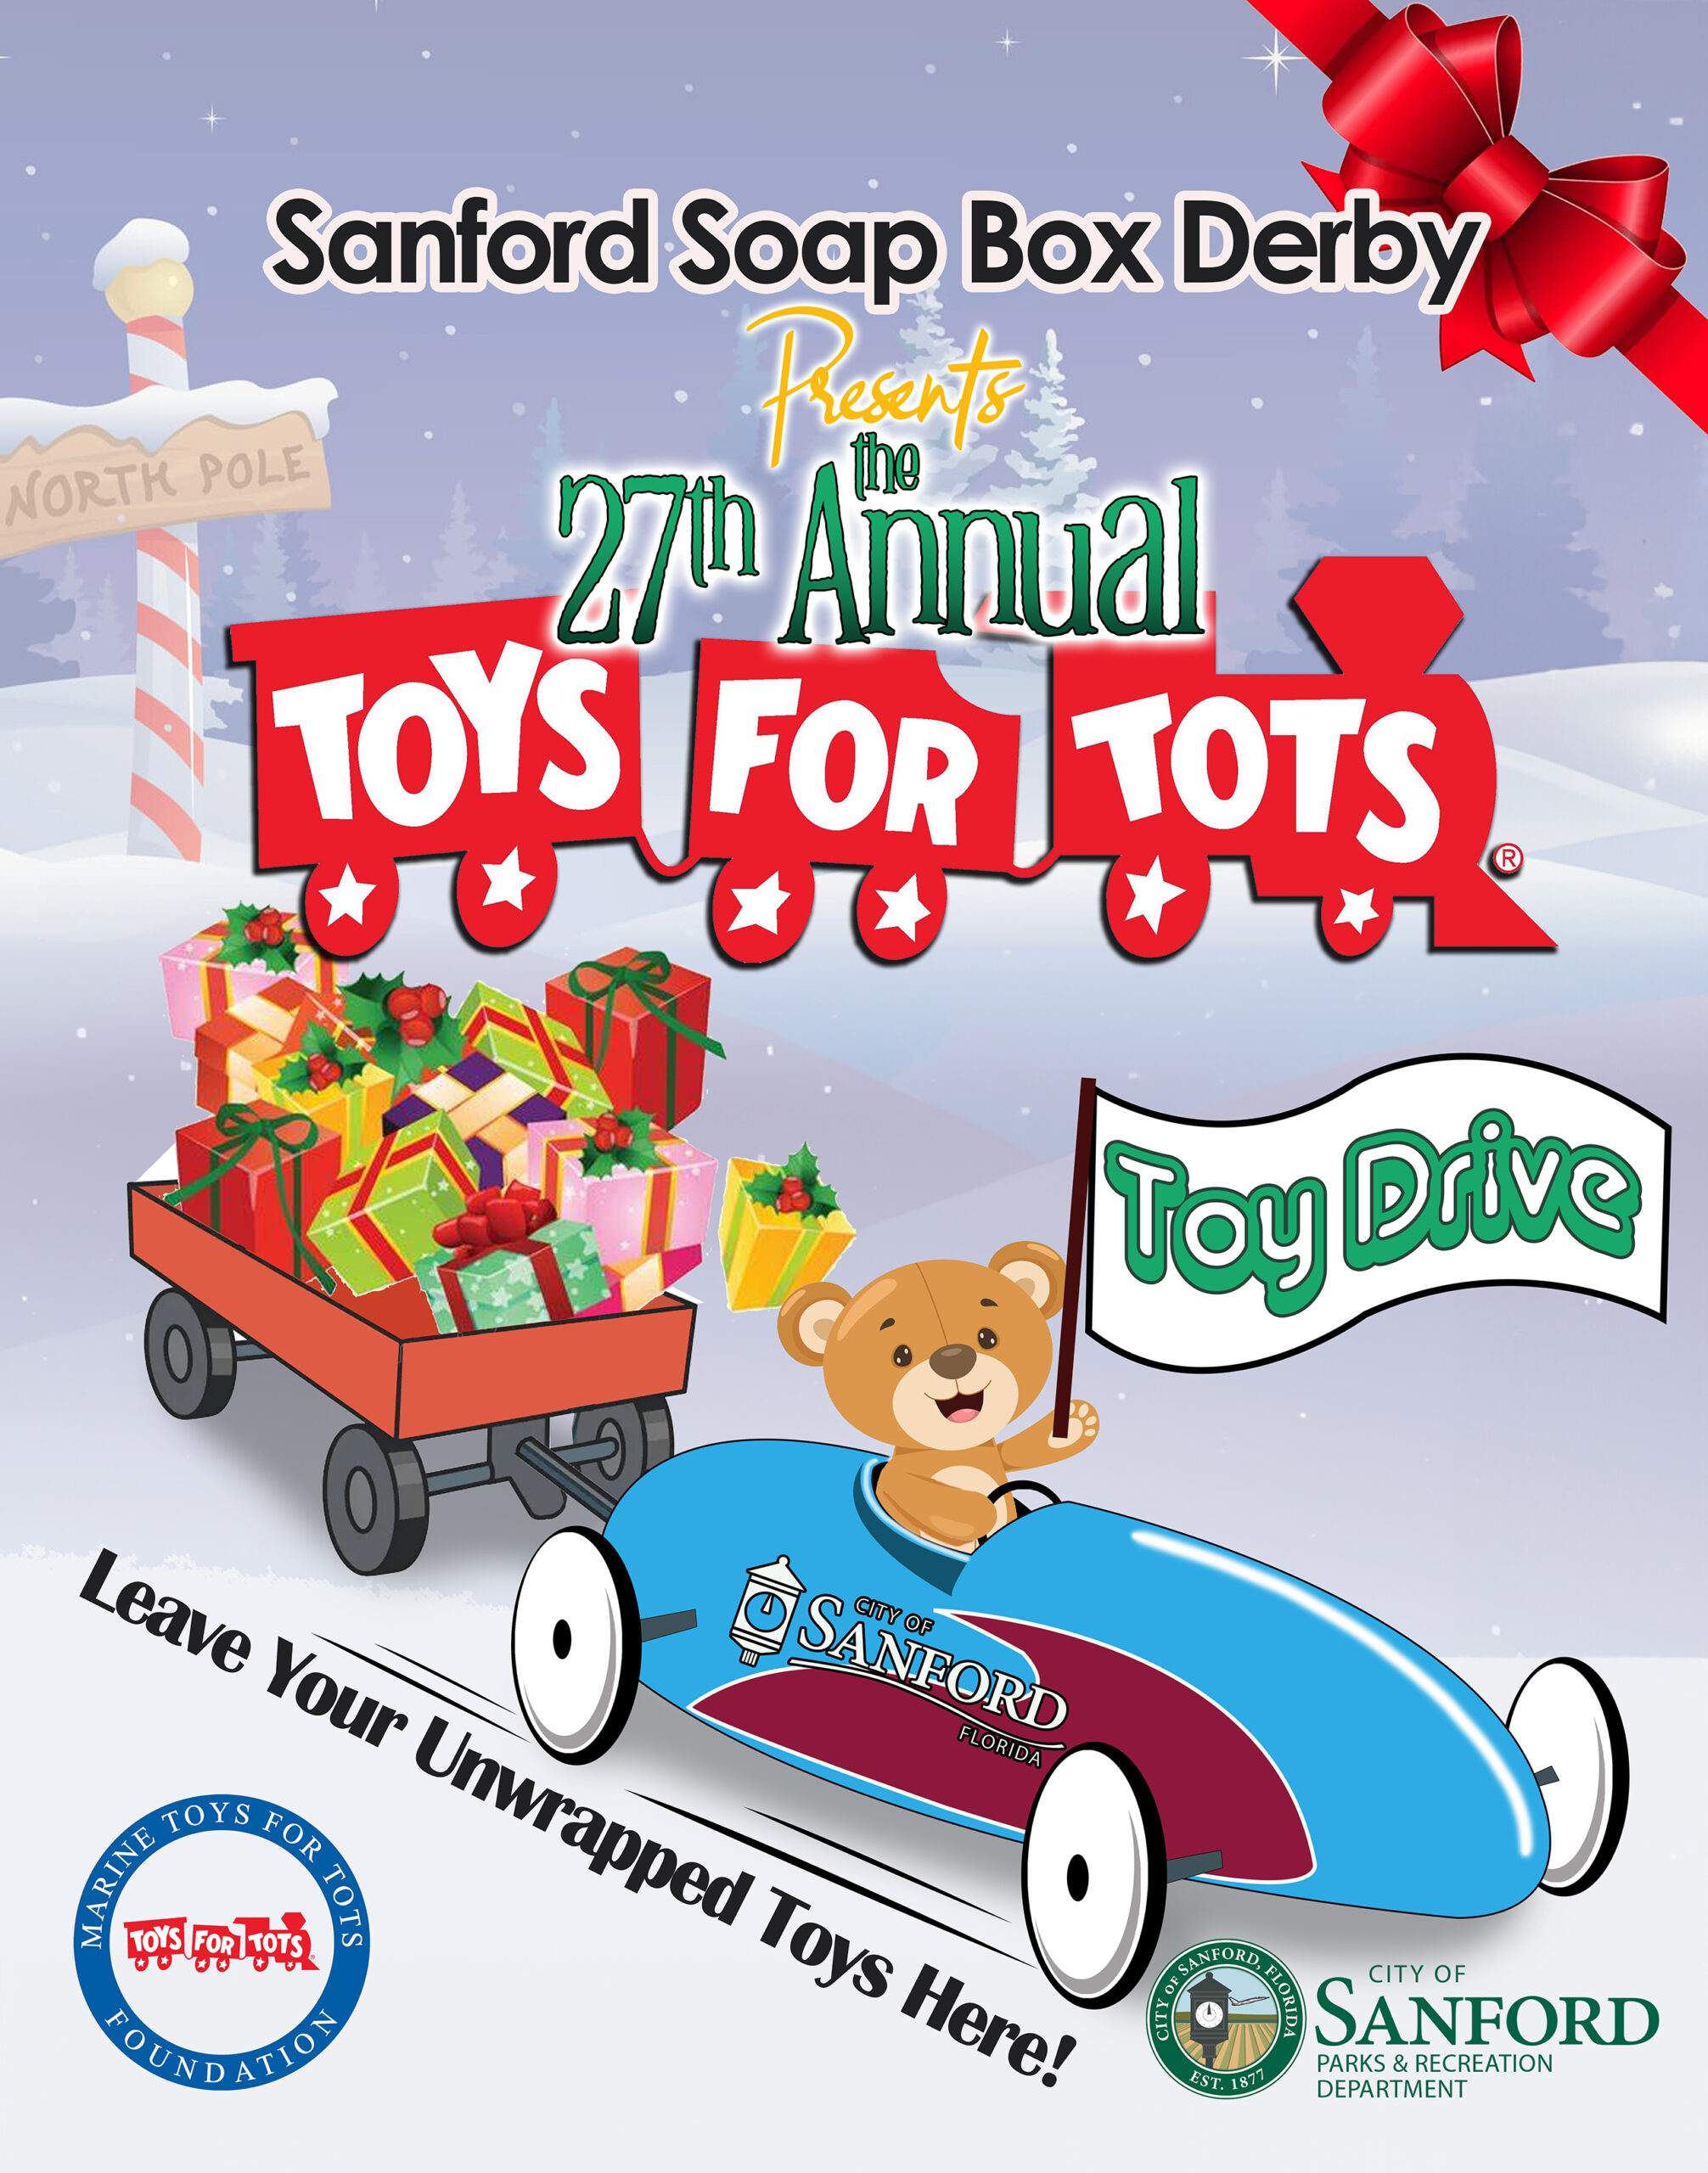 27th Annual Toys For Tots Soap Box